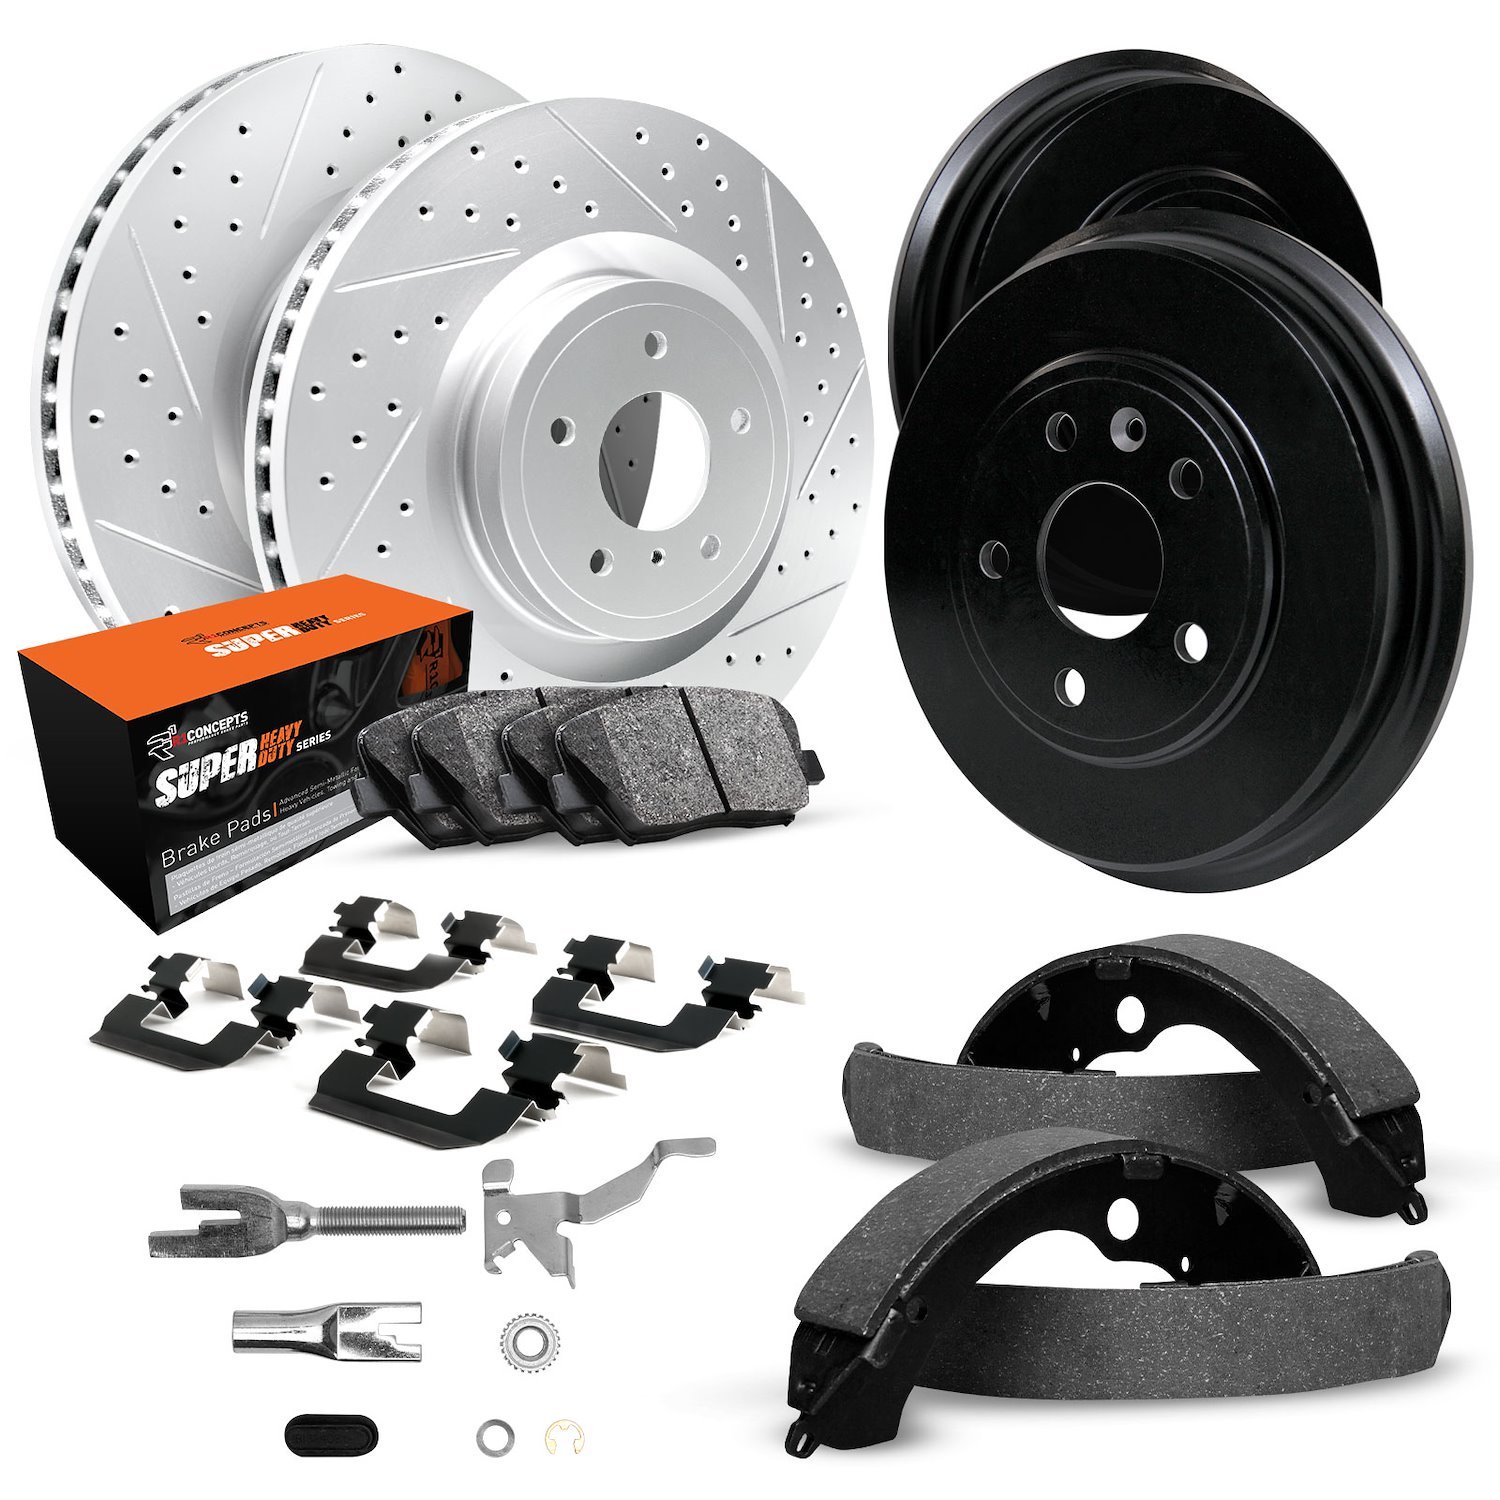 GEO-Carbon Drilled/Slotted Rotors/Drums w/Super-Duty Pads/Shoes/Hardware/Adjusters, 1979-1980 GM, Position: Front/Rear